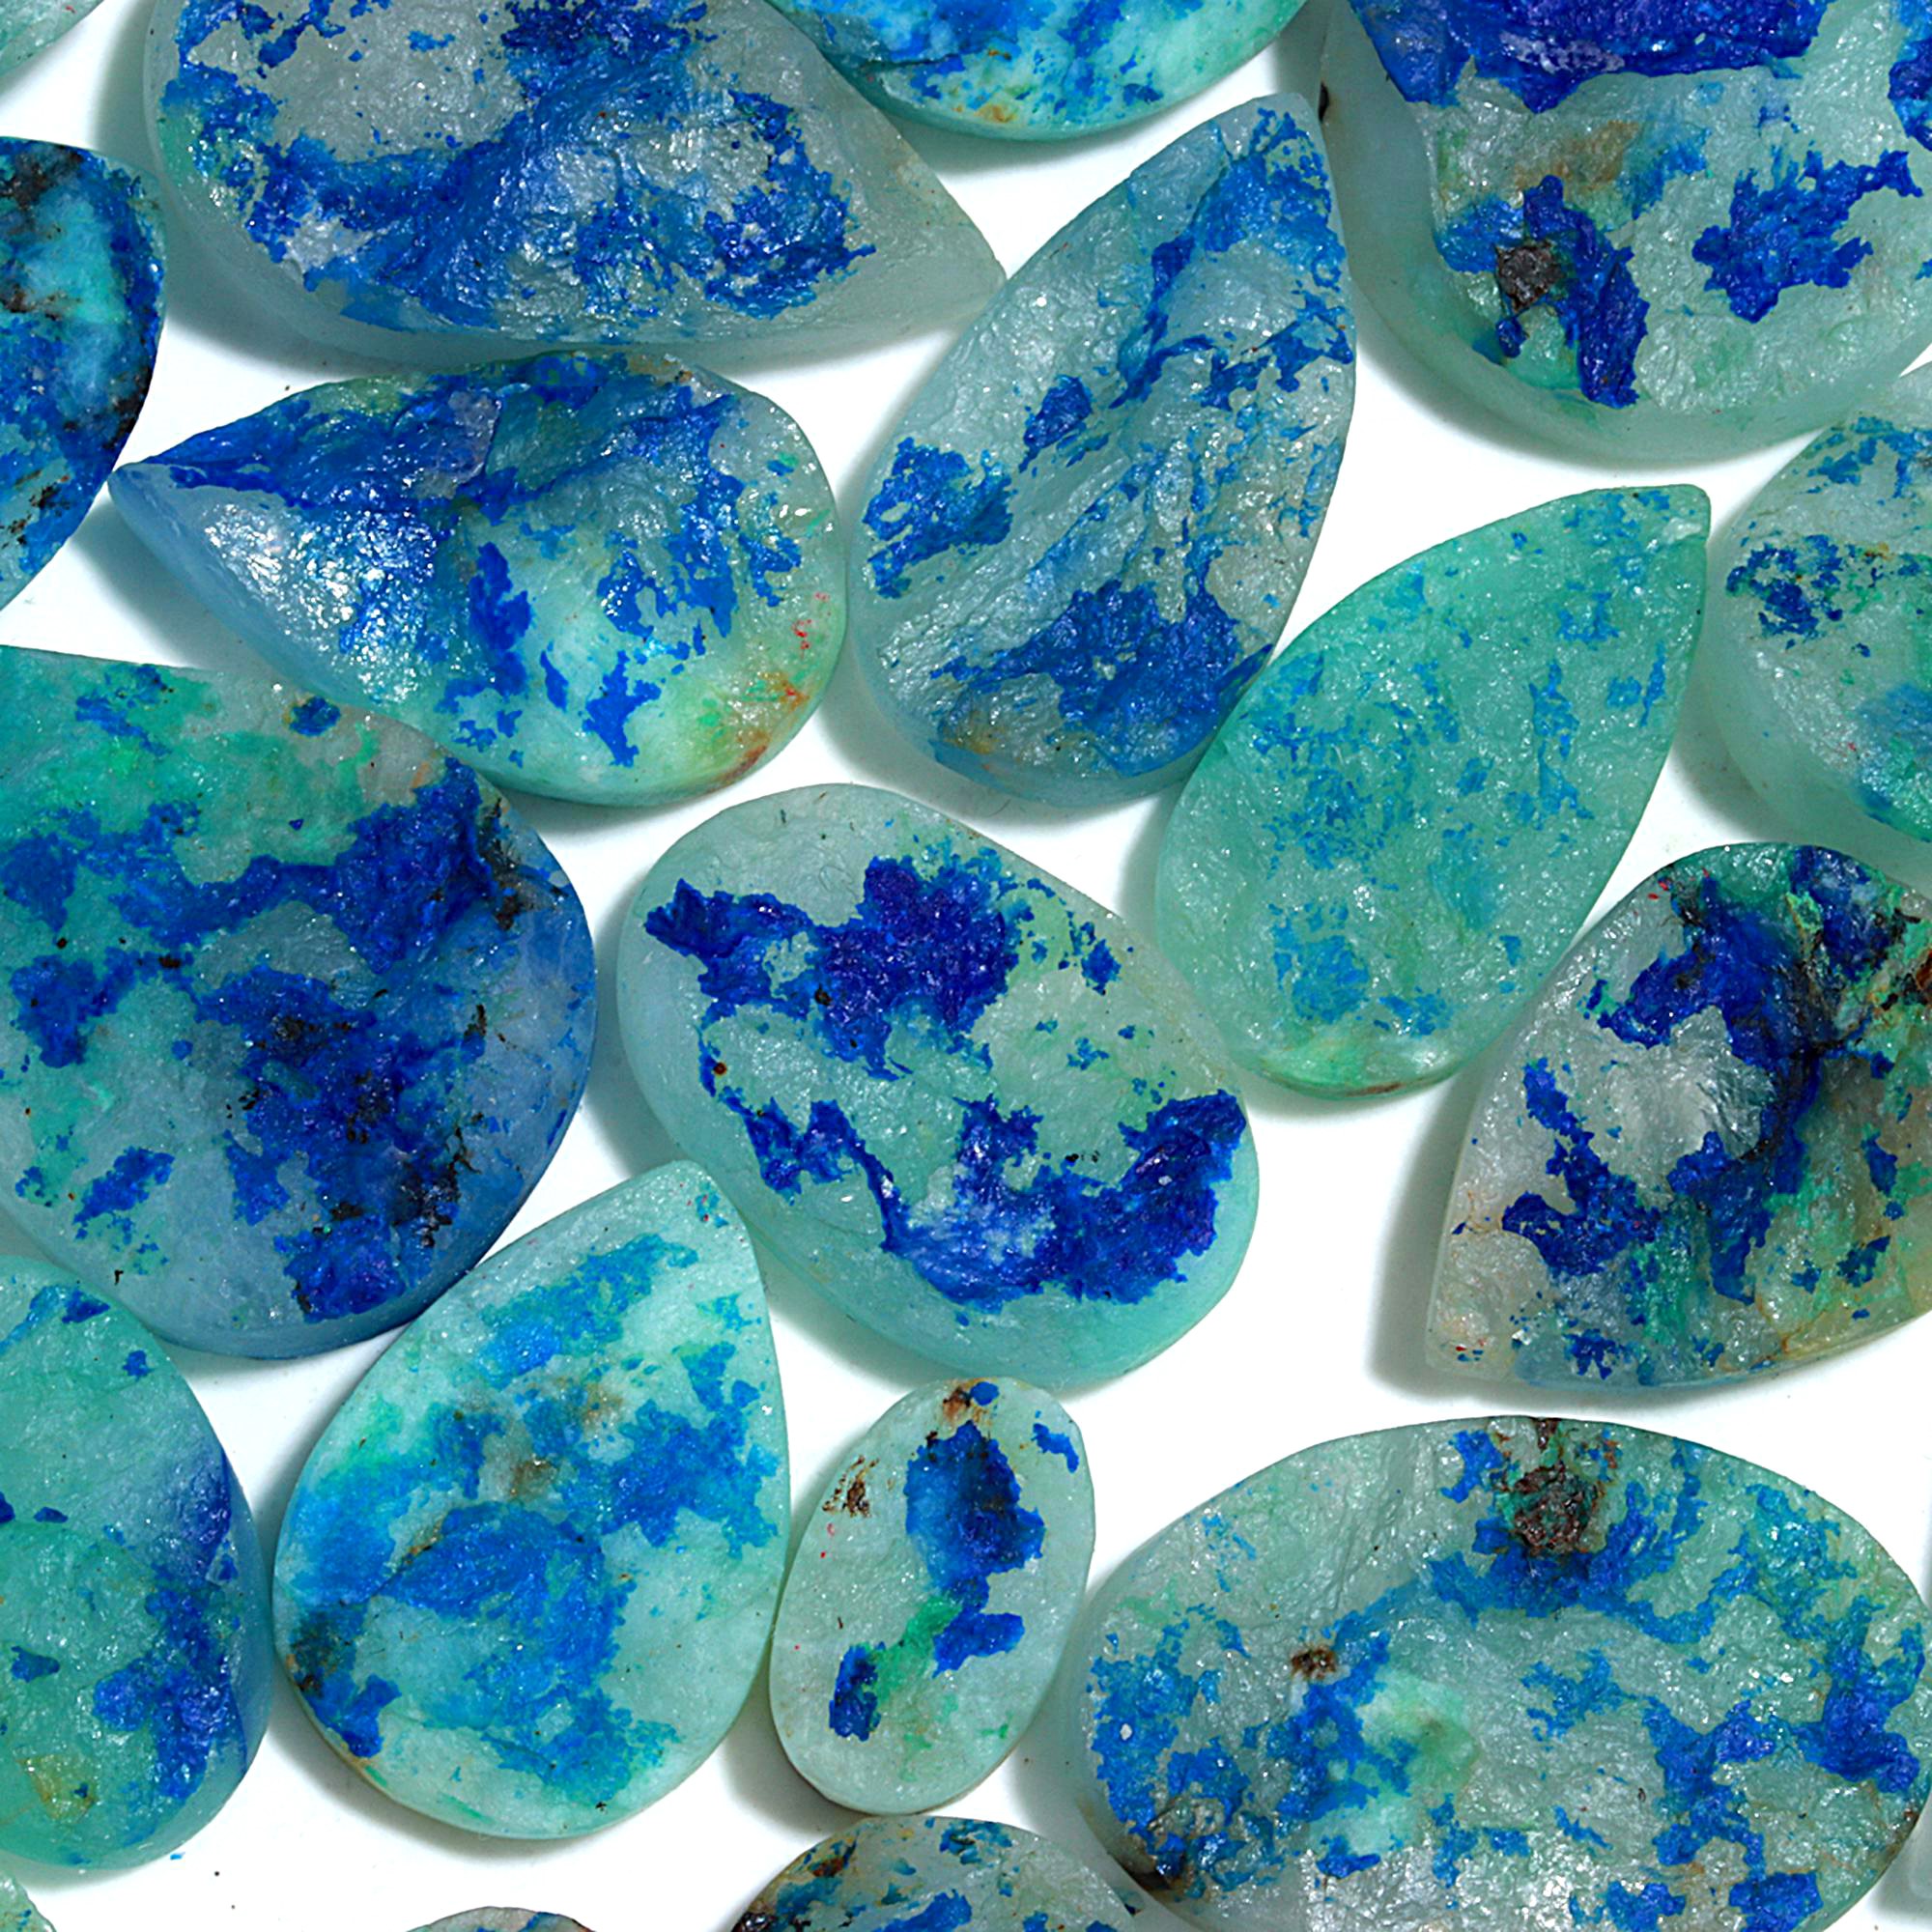 25 Pcs 752.Cts Natural Azurite Druzy Unpolished Loose Cabochon Gemstone For Jewelry Wholesale Lot Size 40x14 17x11mm